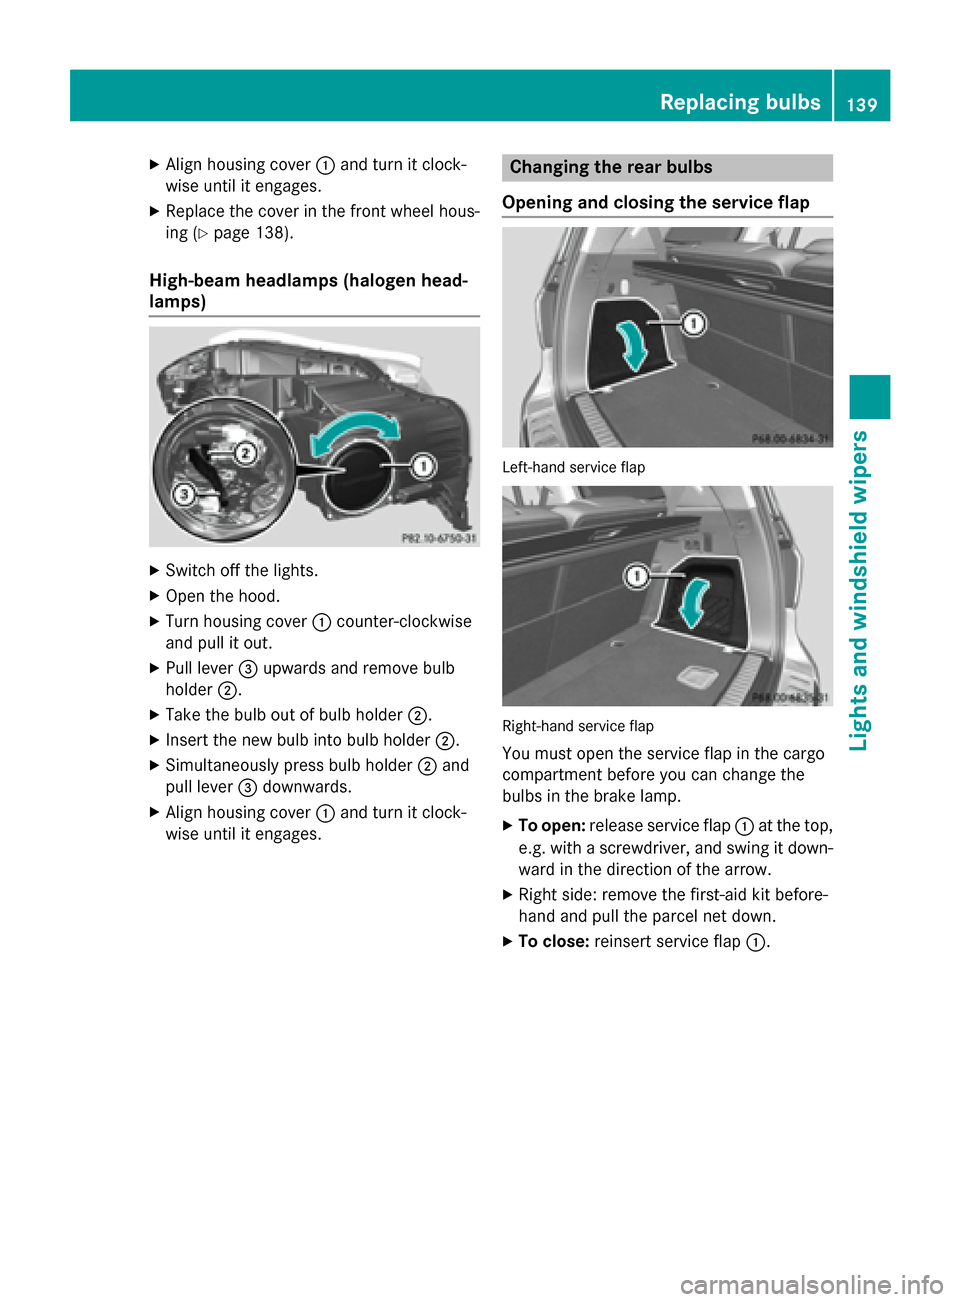 MERCEDES-BENZ GL-Class 2015 X166 User Guide X
Align housing cover 0043and turn it clock-
wise until it engages.
X Replace the cover in the front wheel hous-
ing (Y page 138).
High-beam headlamps (halogen head-
lamps) X
Switch off the lights.
X 